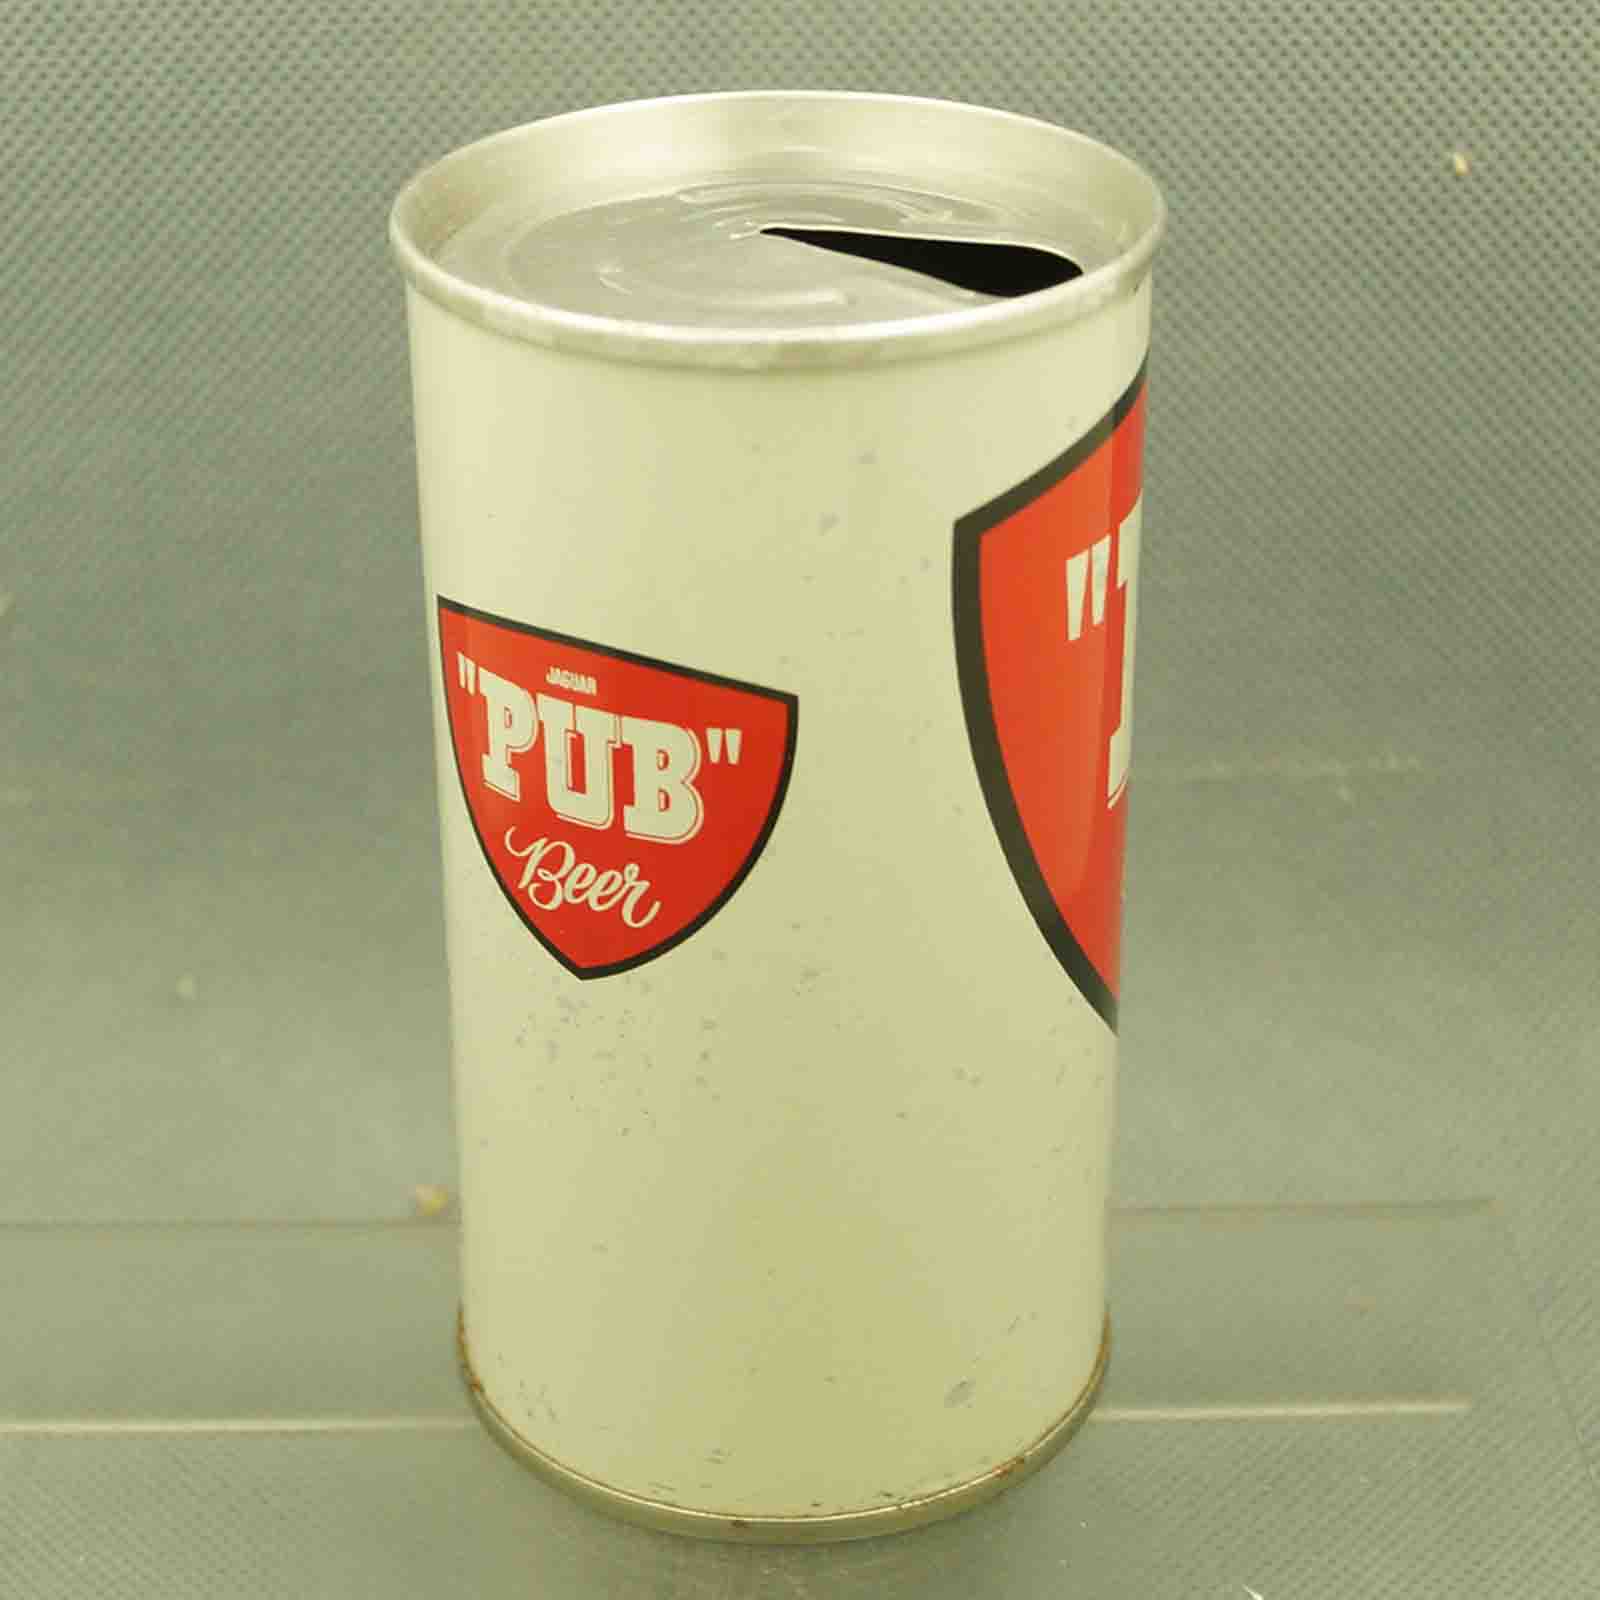 pub 82-35 pull tab beer can 4